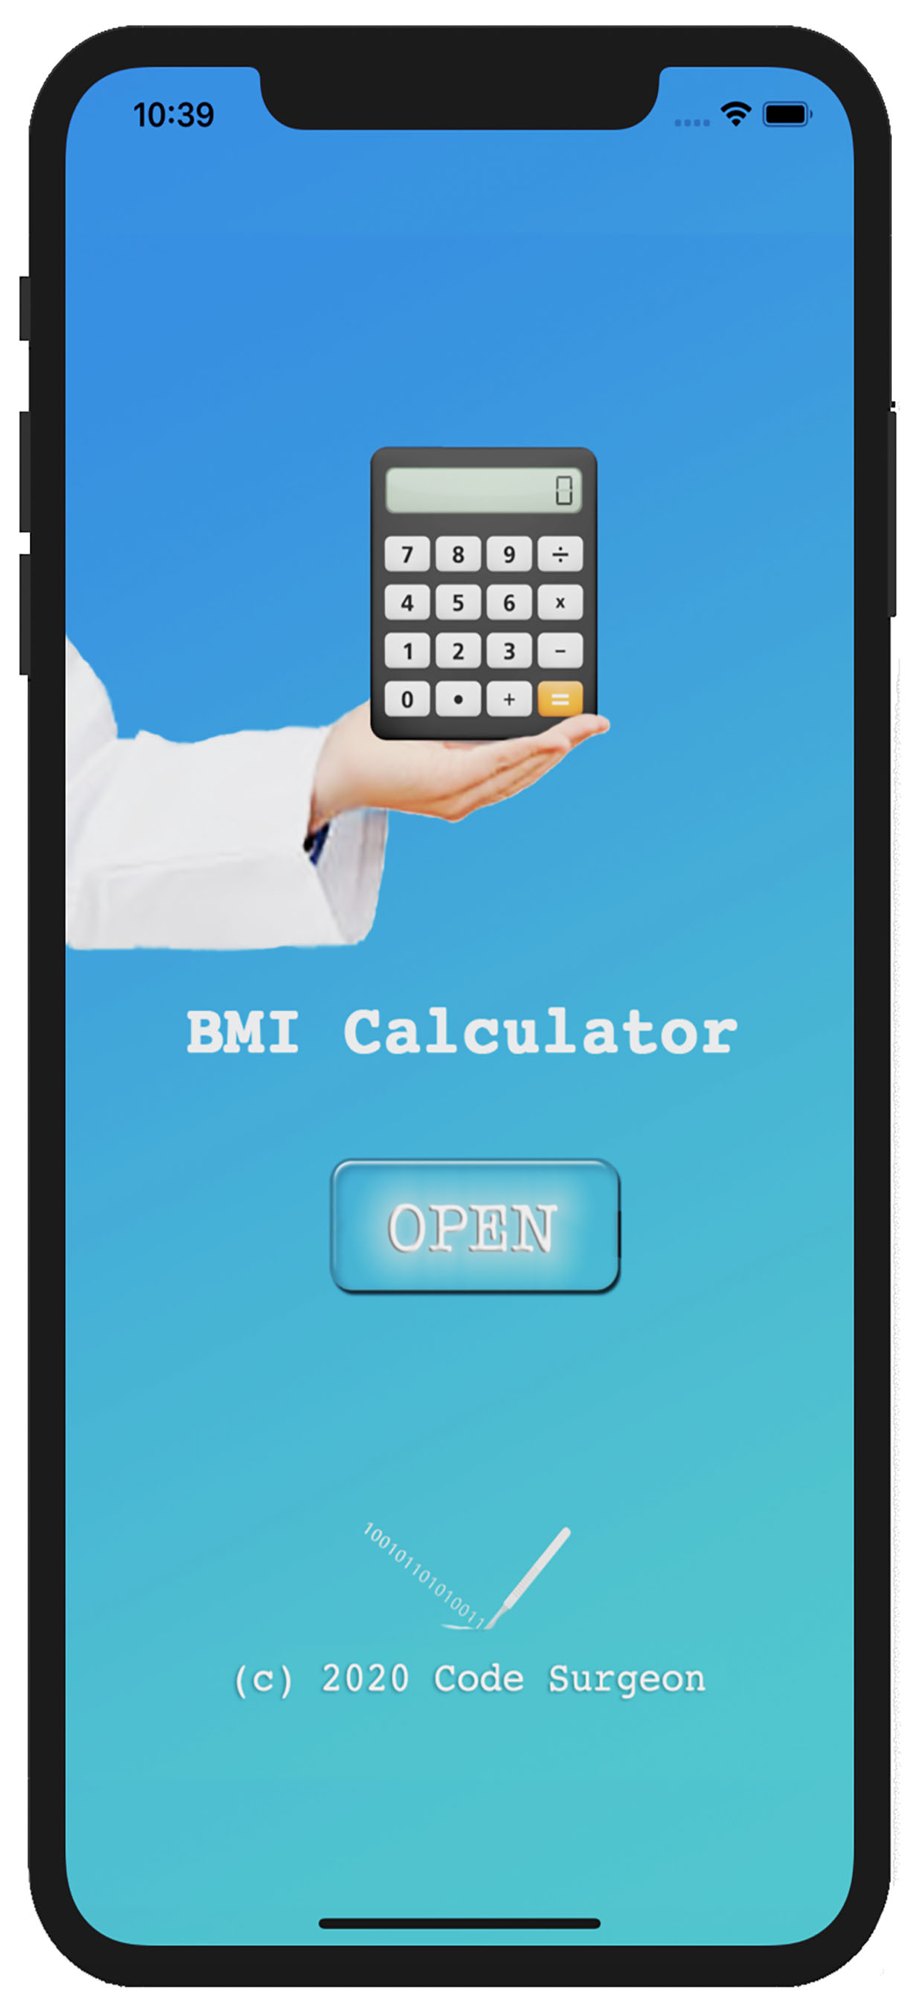 BMI BSA Breast Reduction Calc Free Download App for iPhone - STEPrimo.com